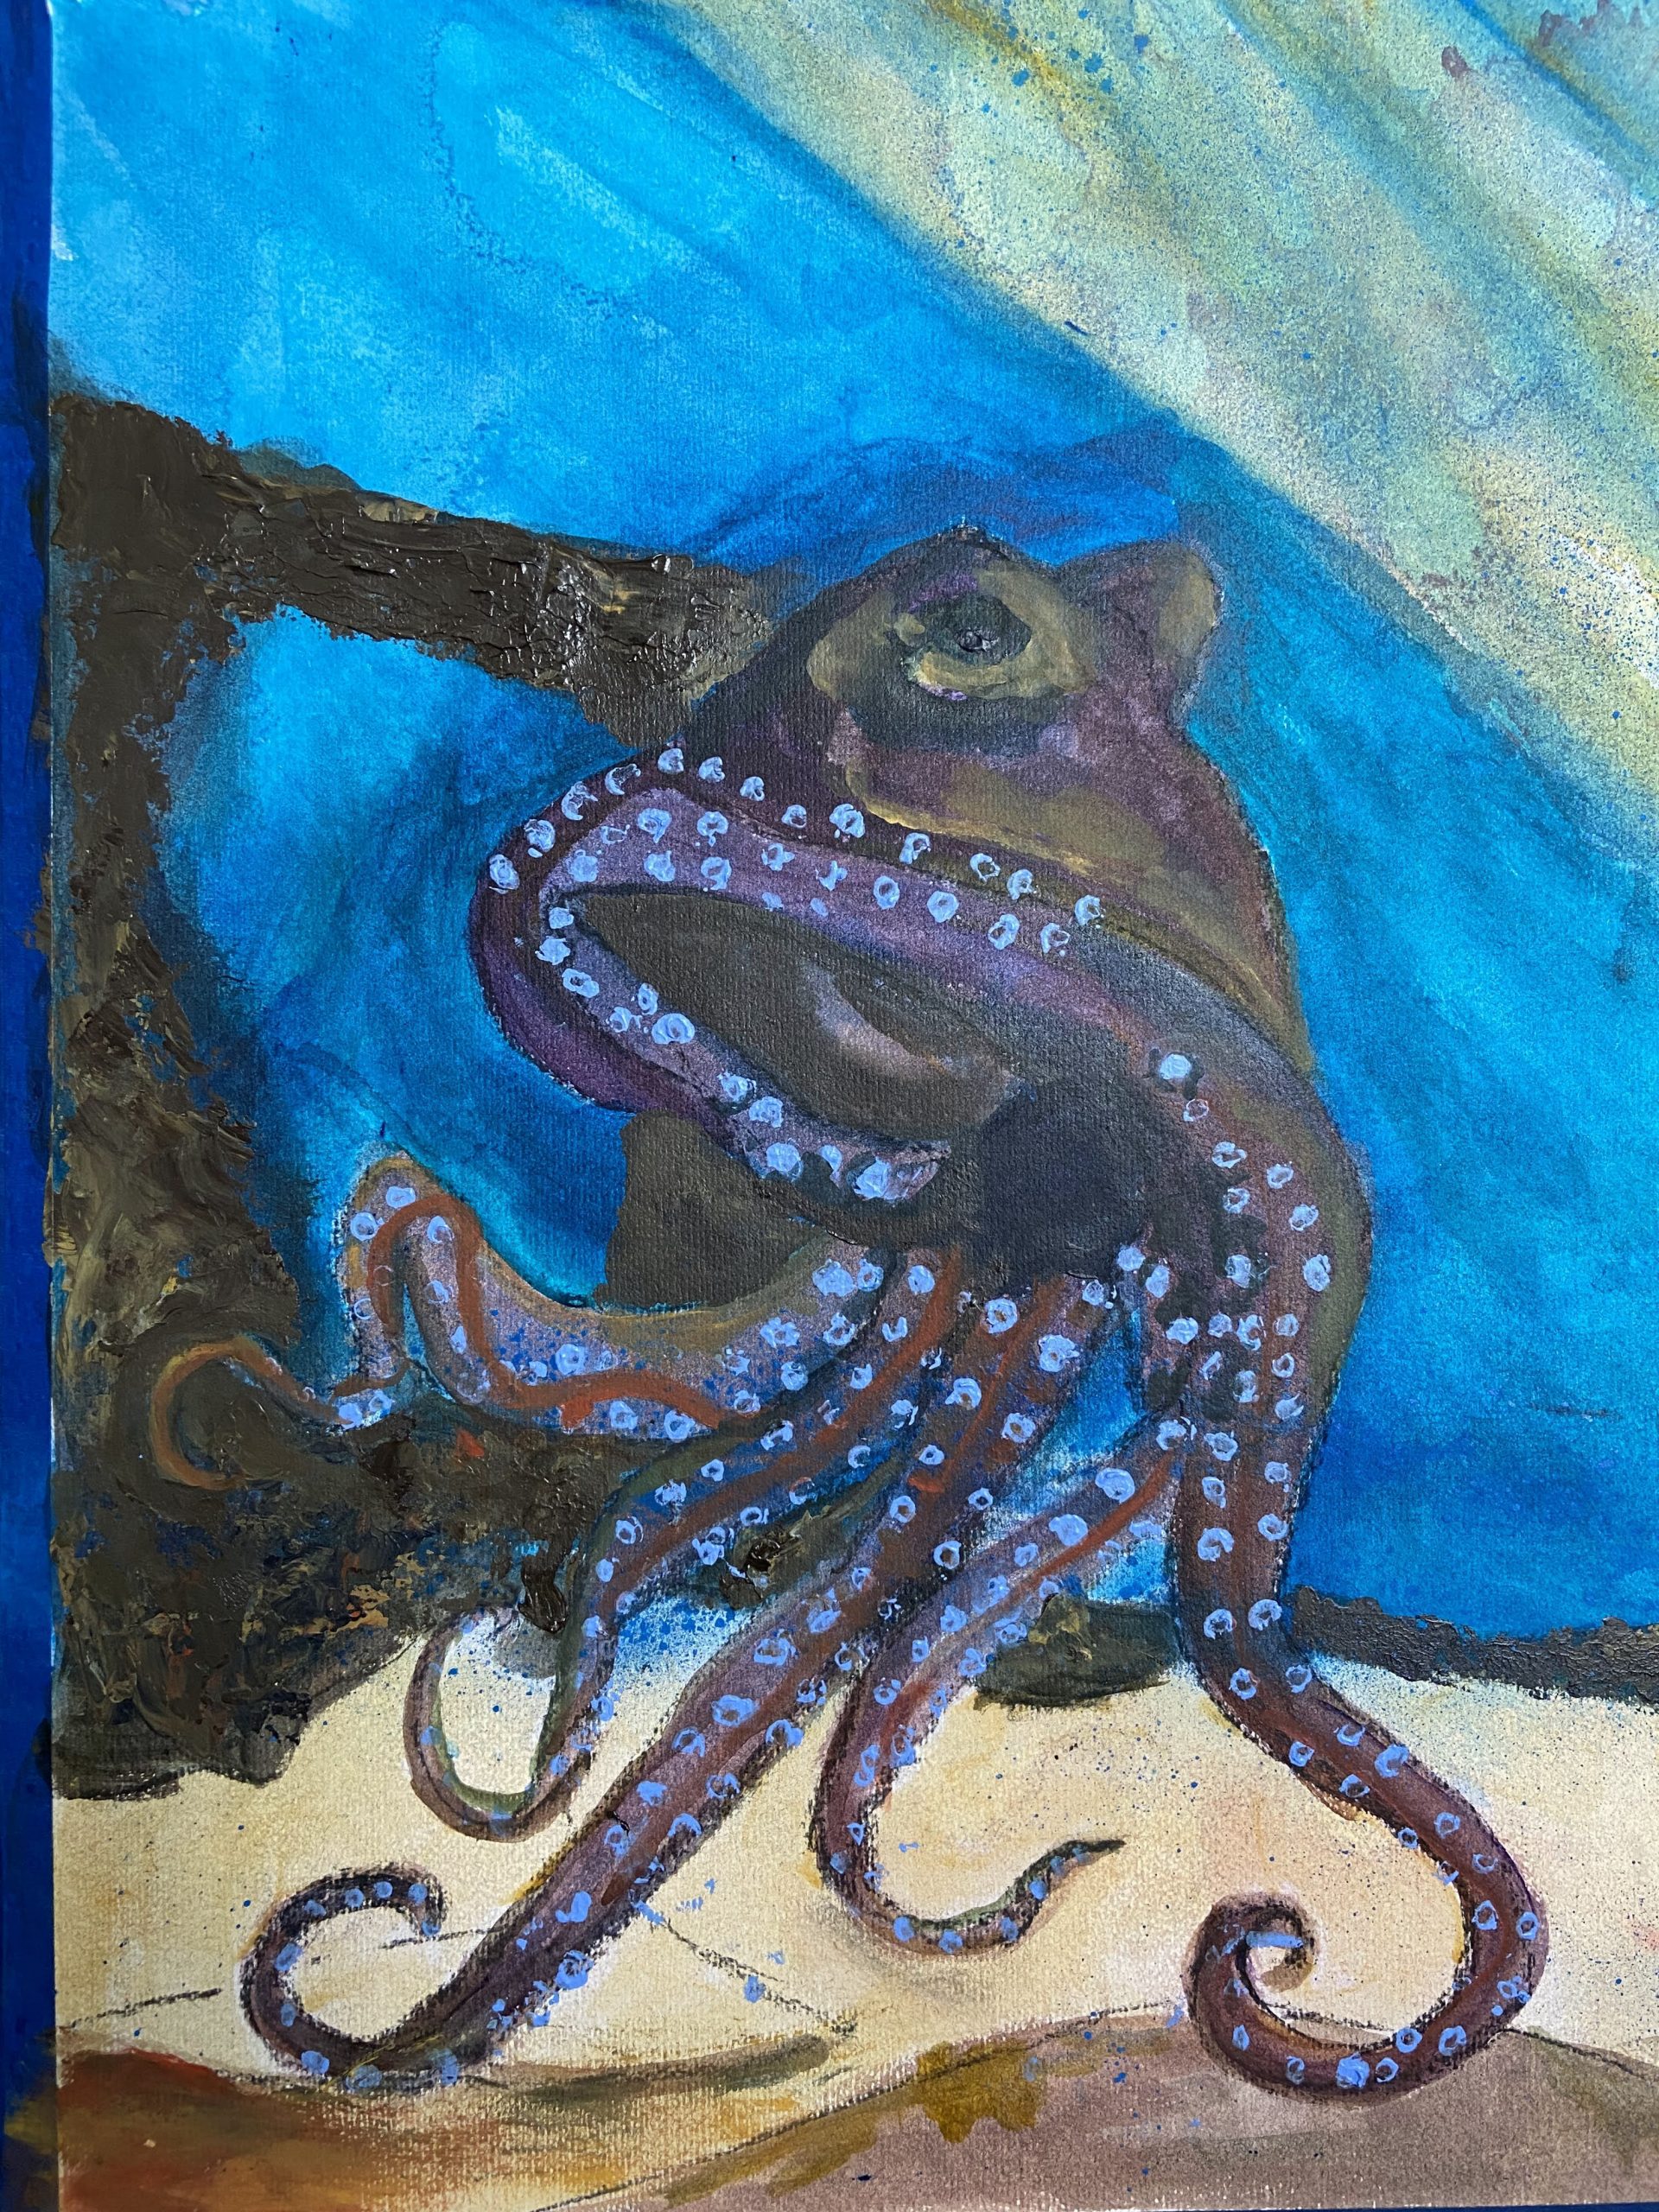 Painting of an octopus 